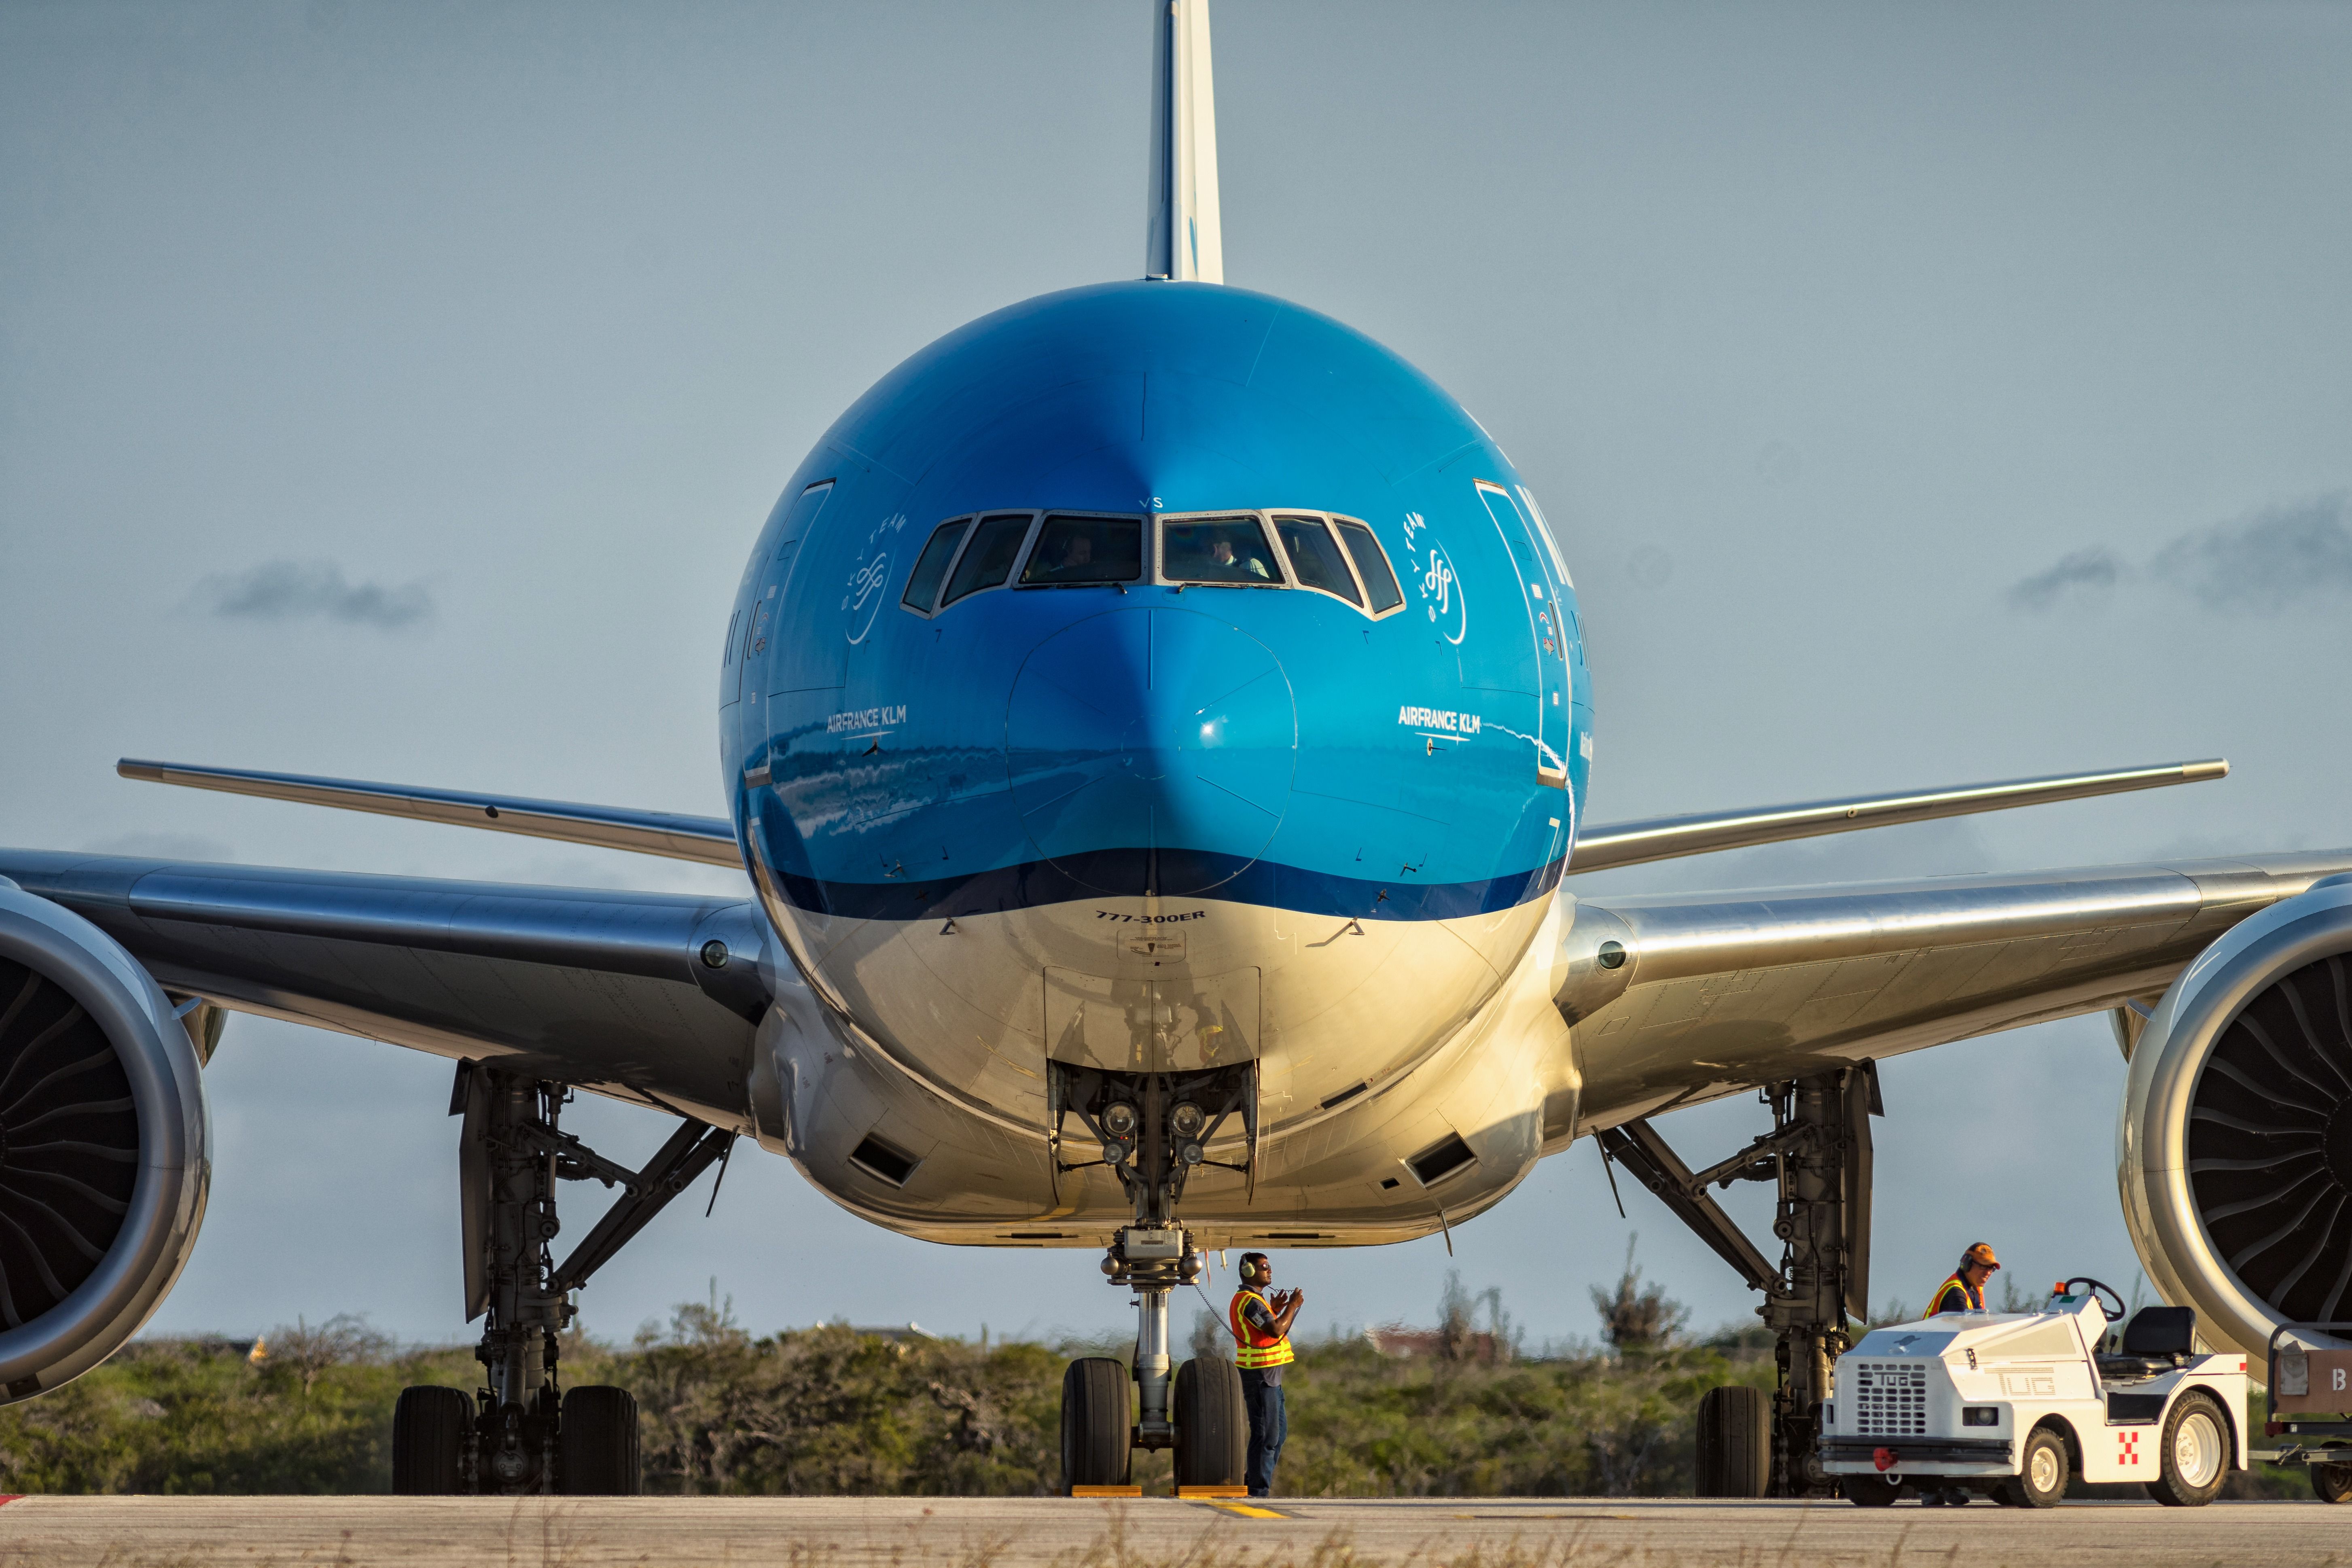 A head on view of a KLM Boeing 777-300ER.